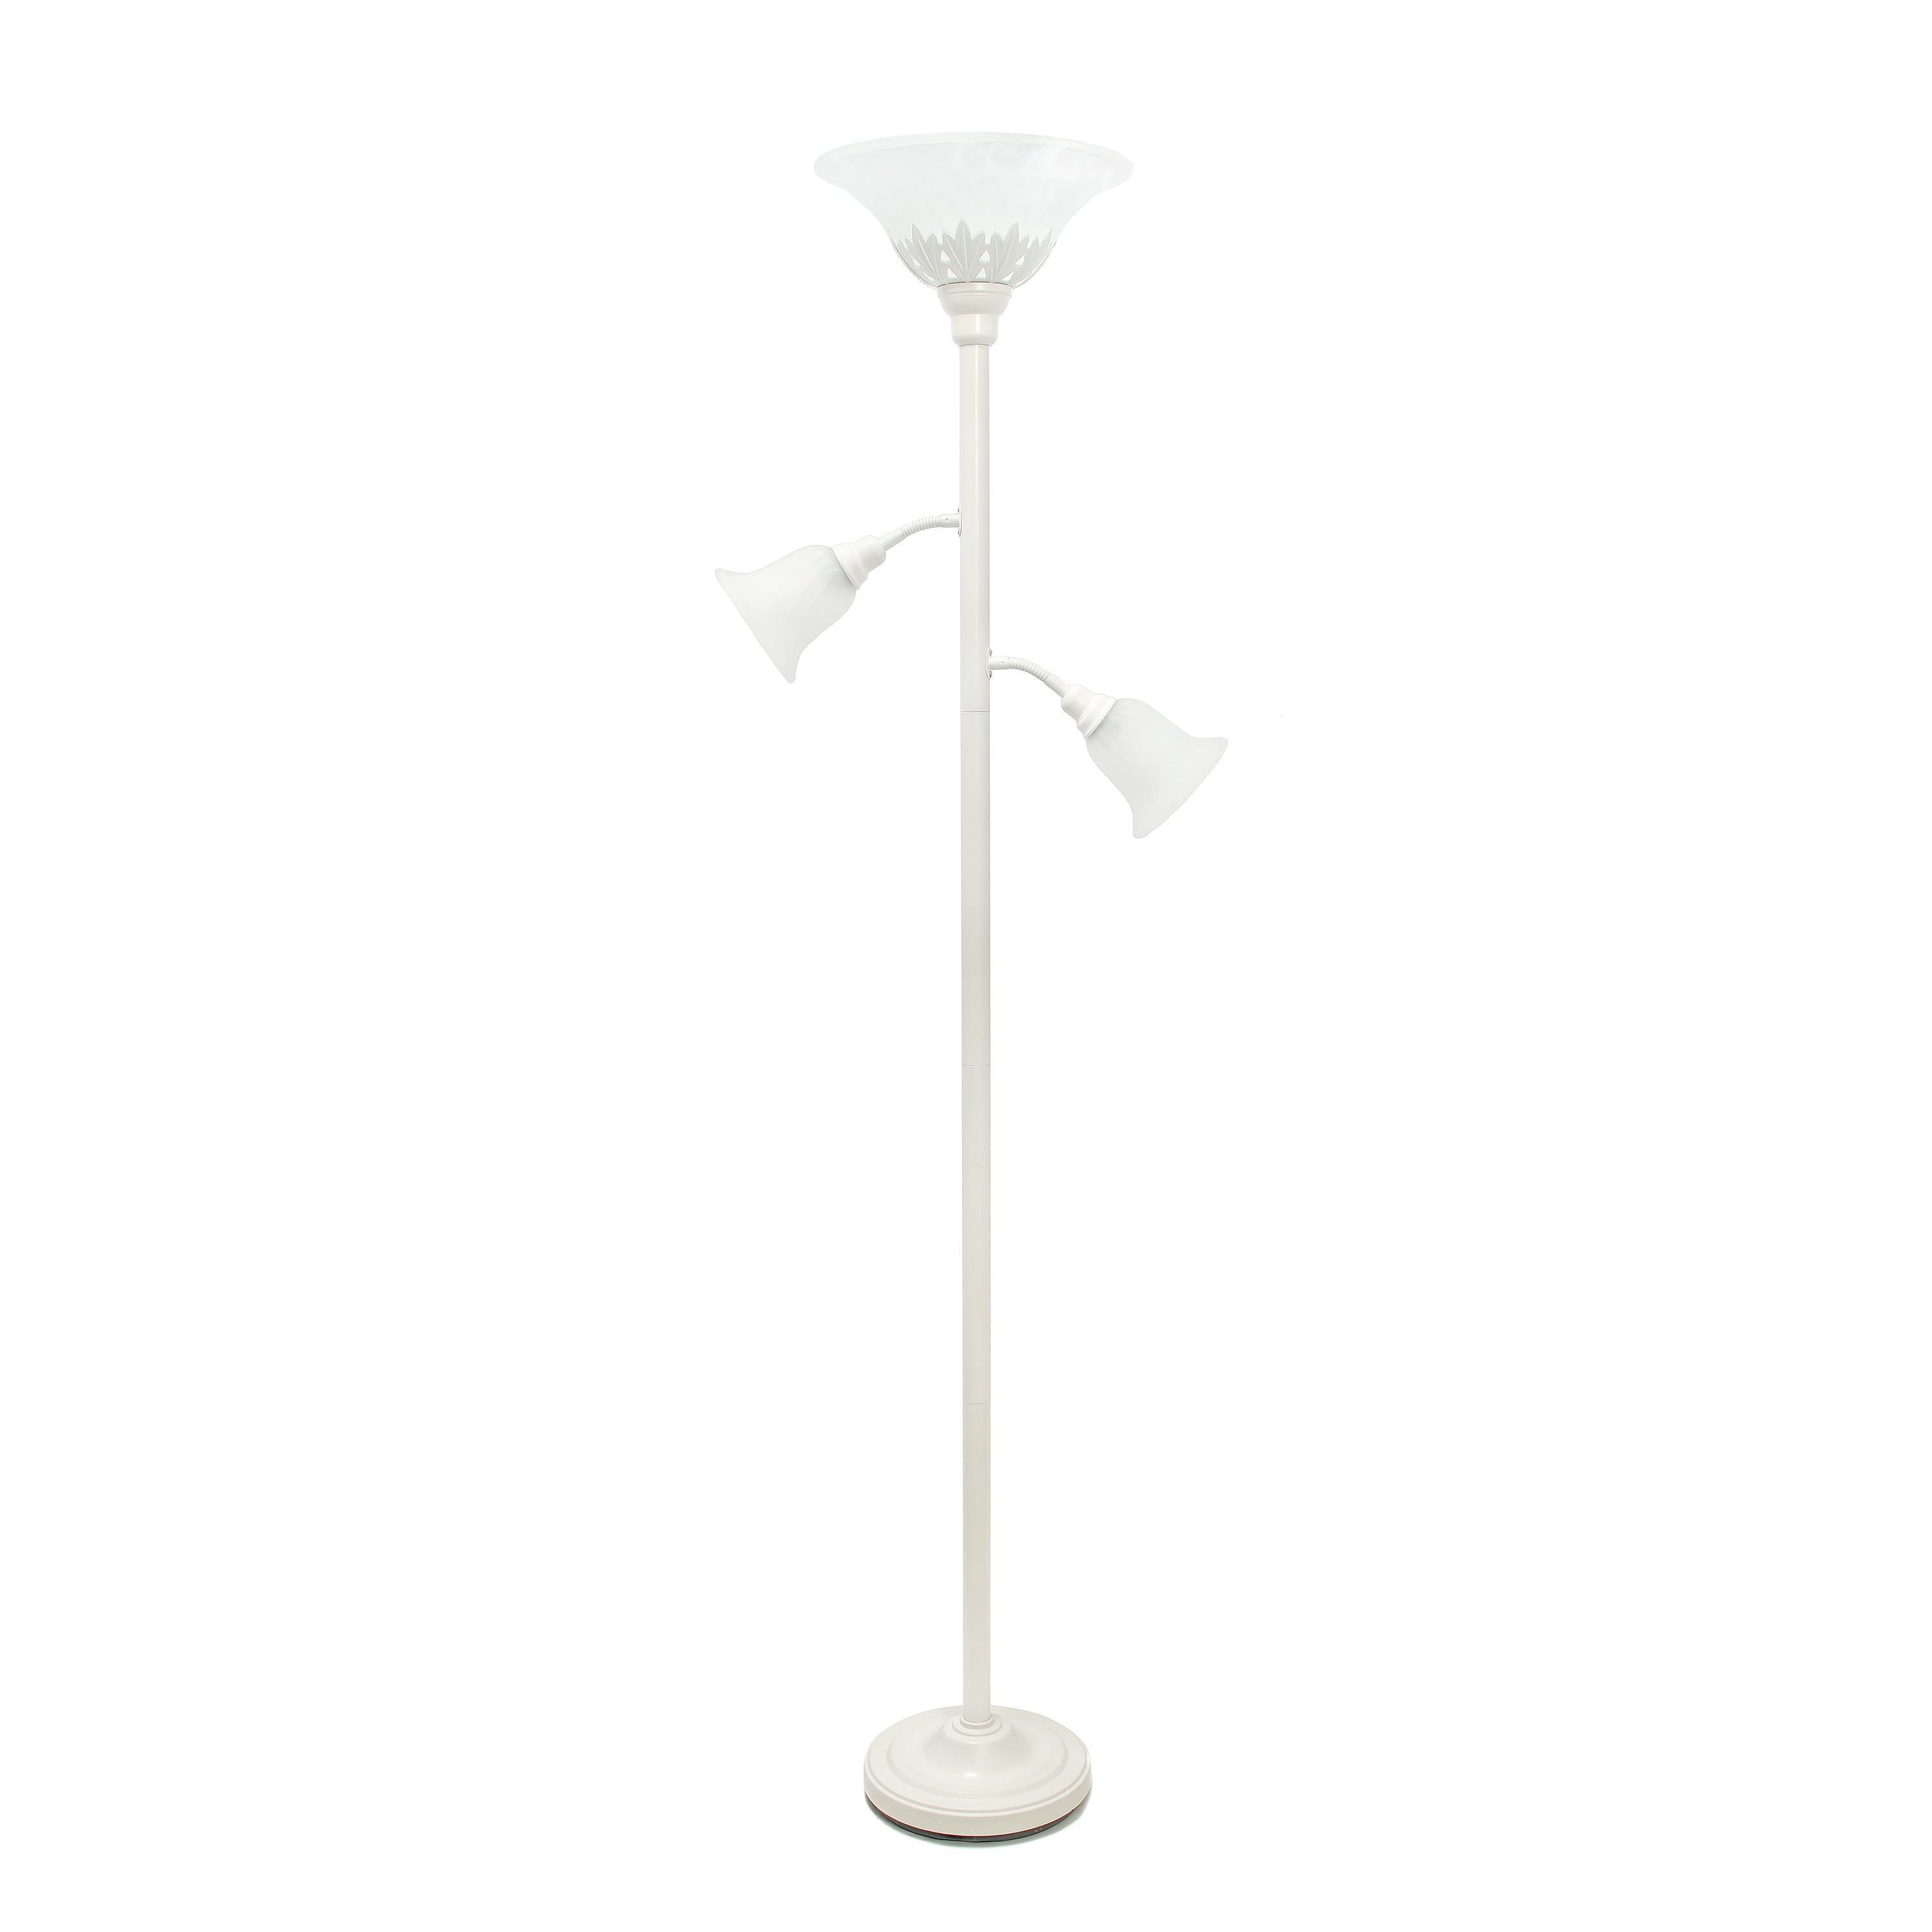 Lalia Home Torchiere Floor Lamp with 2 Reading Lights and Scalloped Glass Shades, White